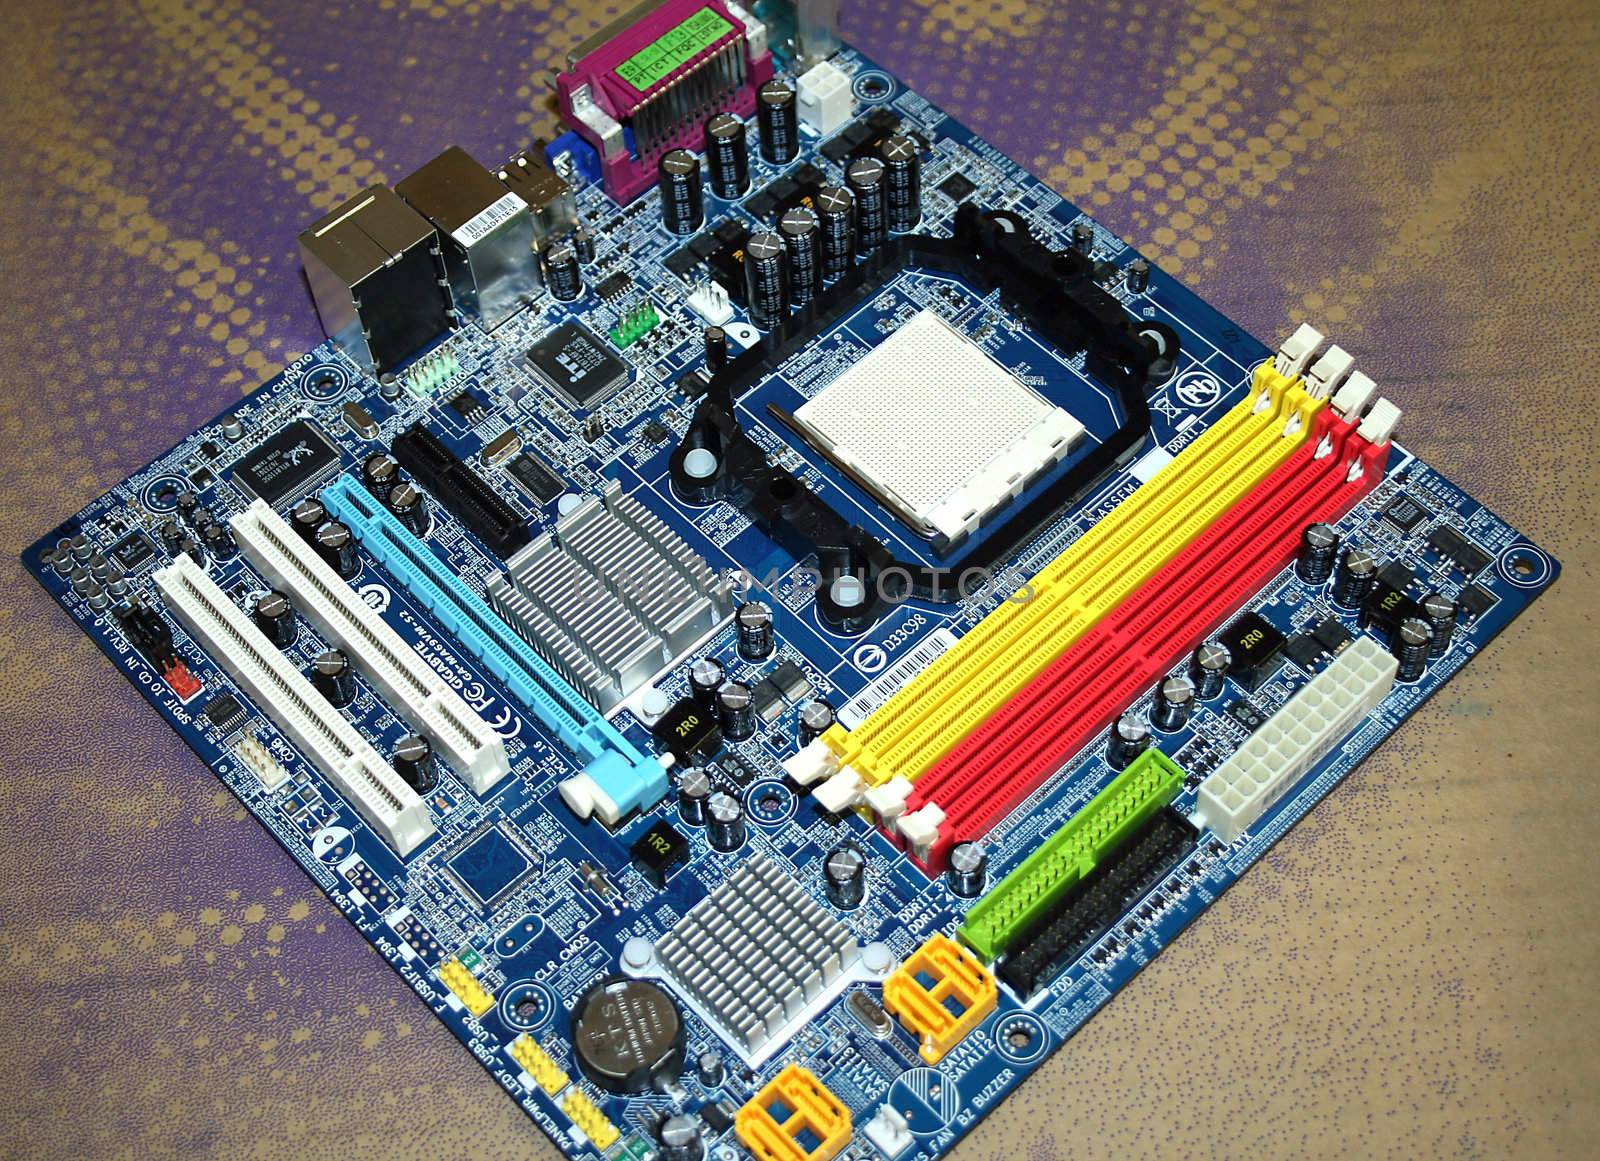 mother board